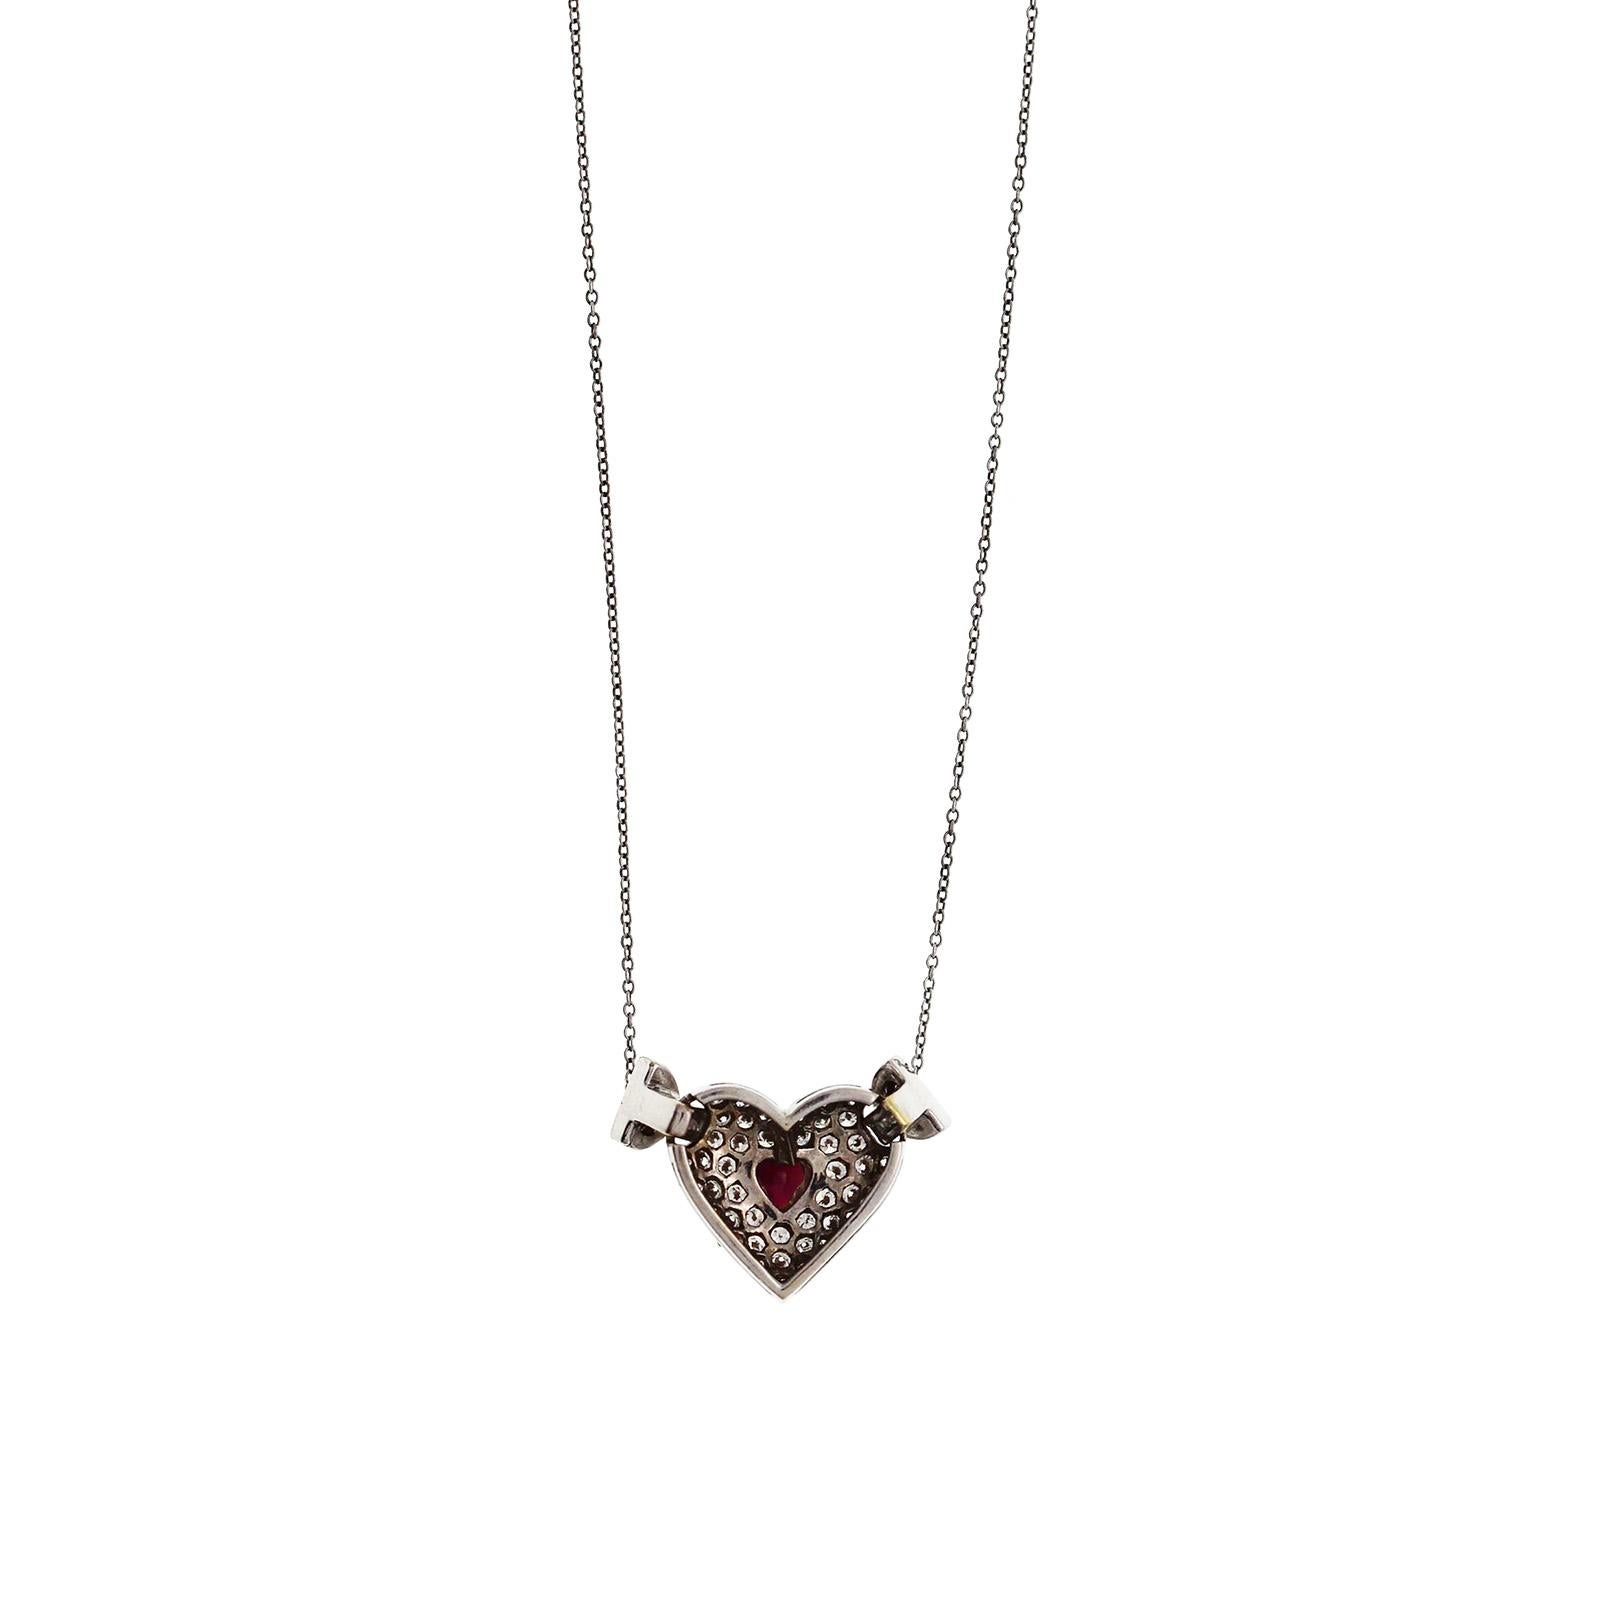 18 Karat White Gold 1.28 Carat Diamonds and 0.50 Carat Ruby Heart Necklace For Sale 2